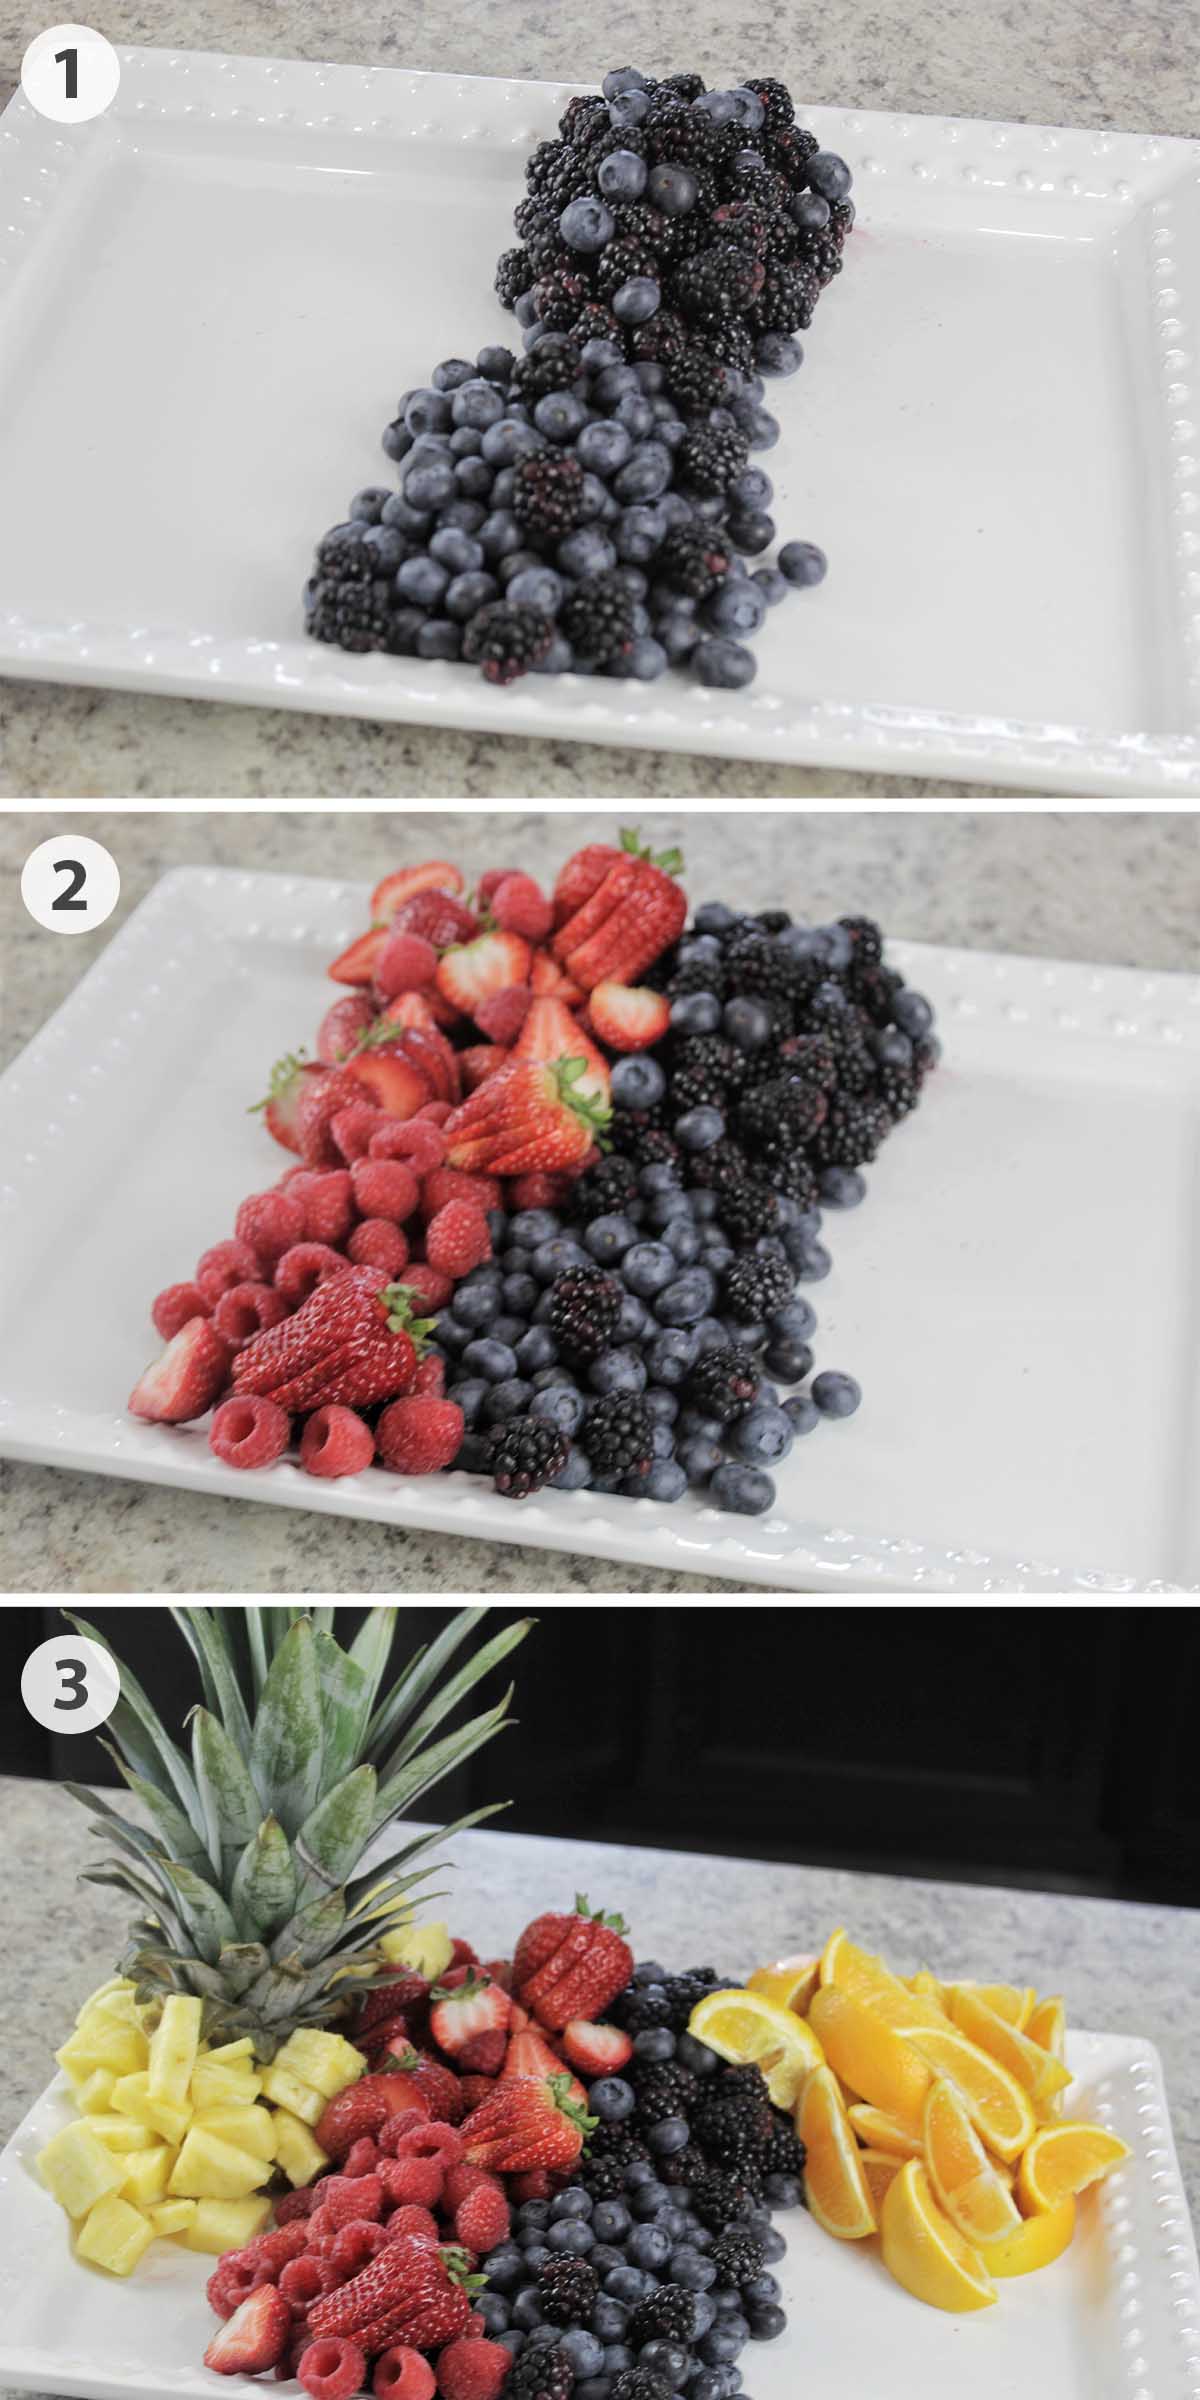 three numbered photos showing how to assemble a fruit display.